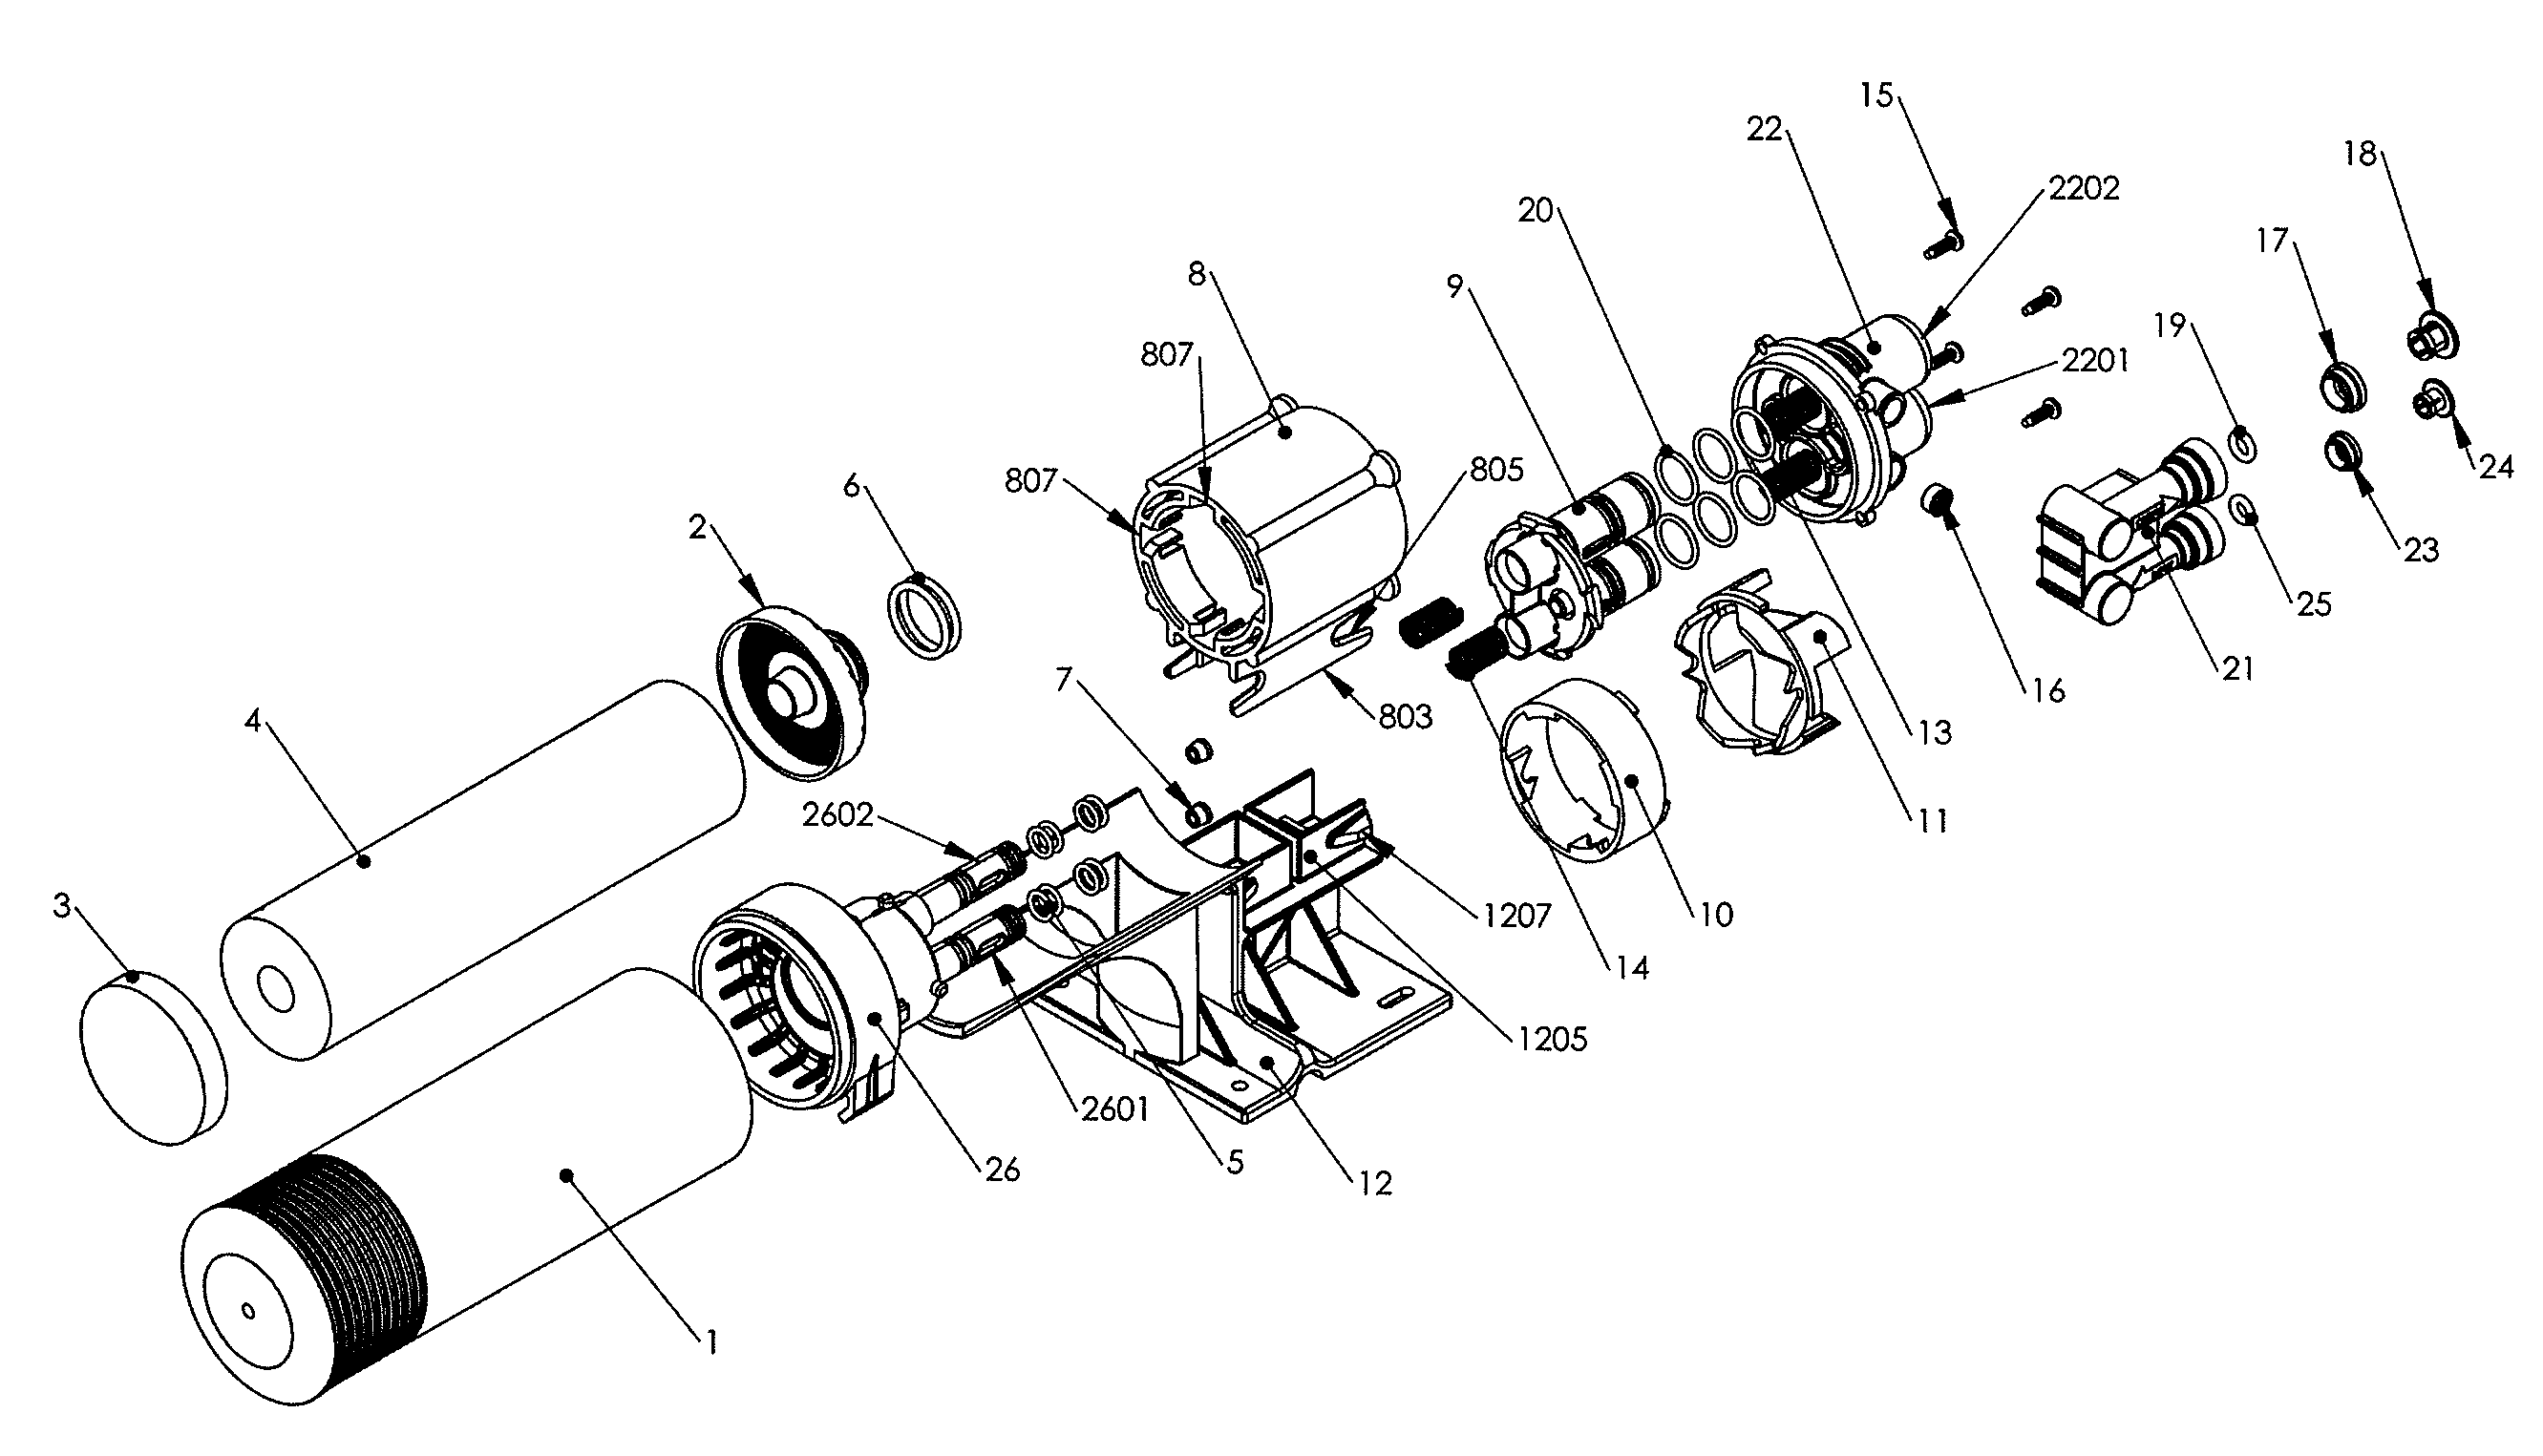 Filter housing apparatus with rotating filter replacement mechanism